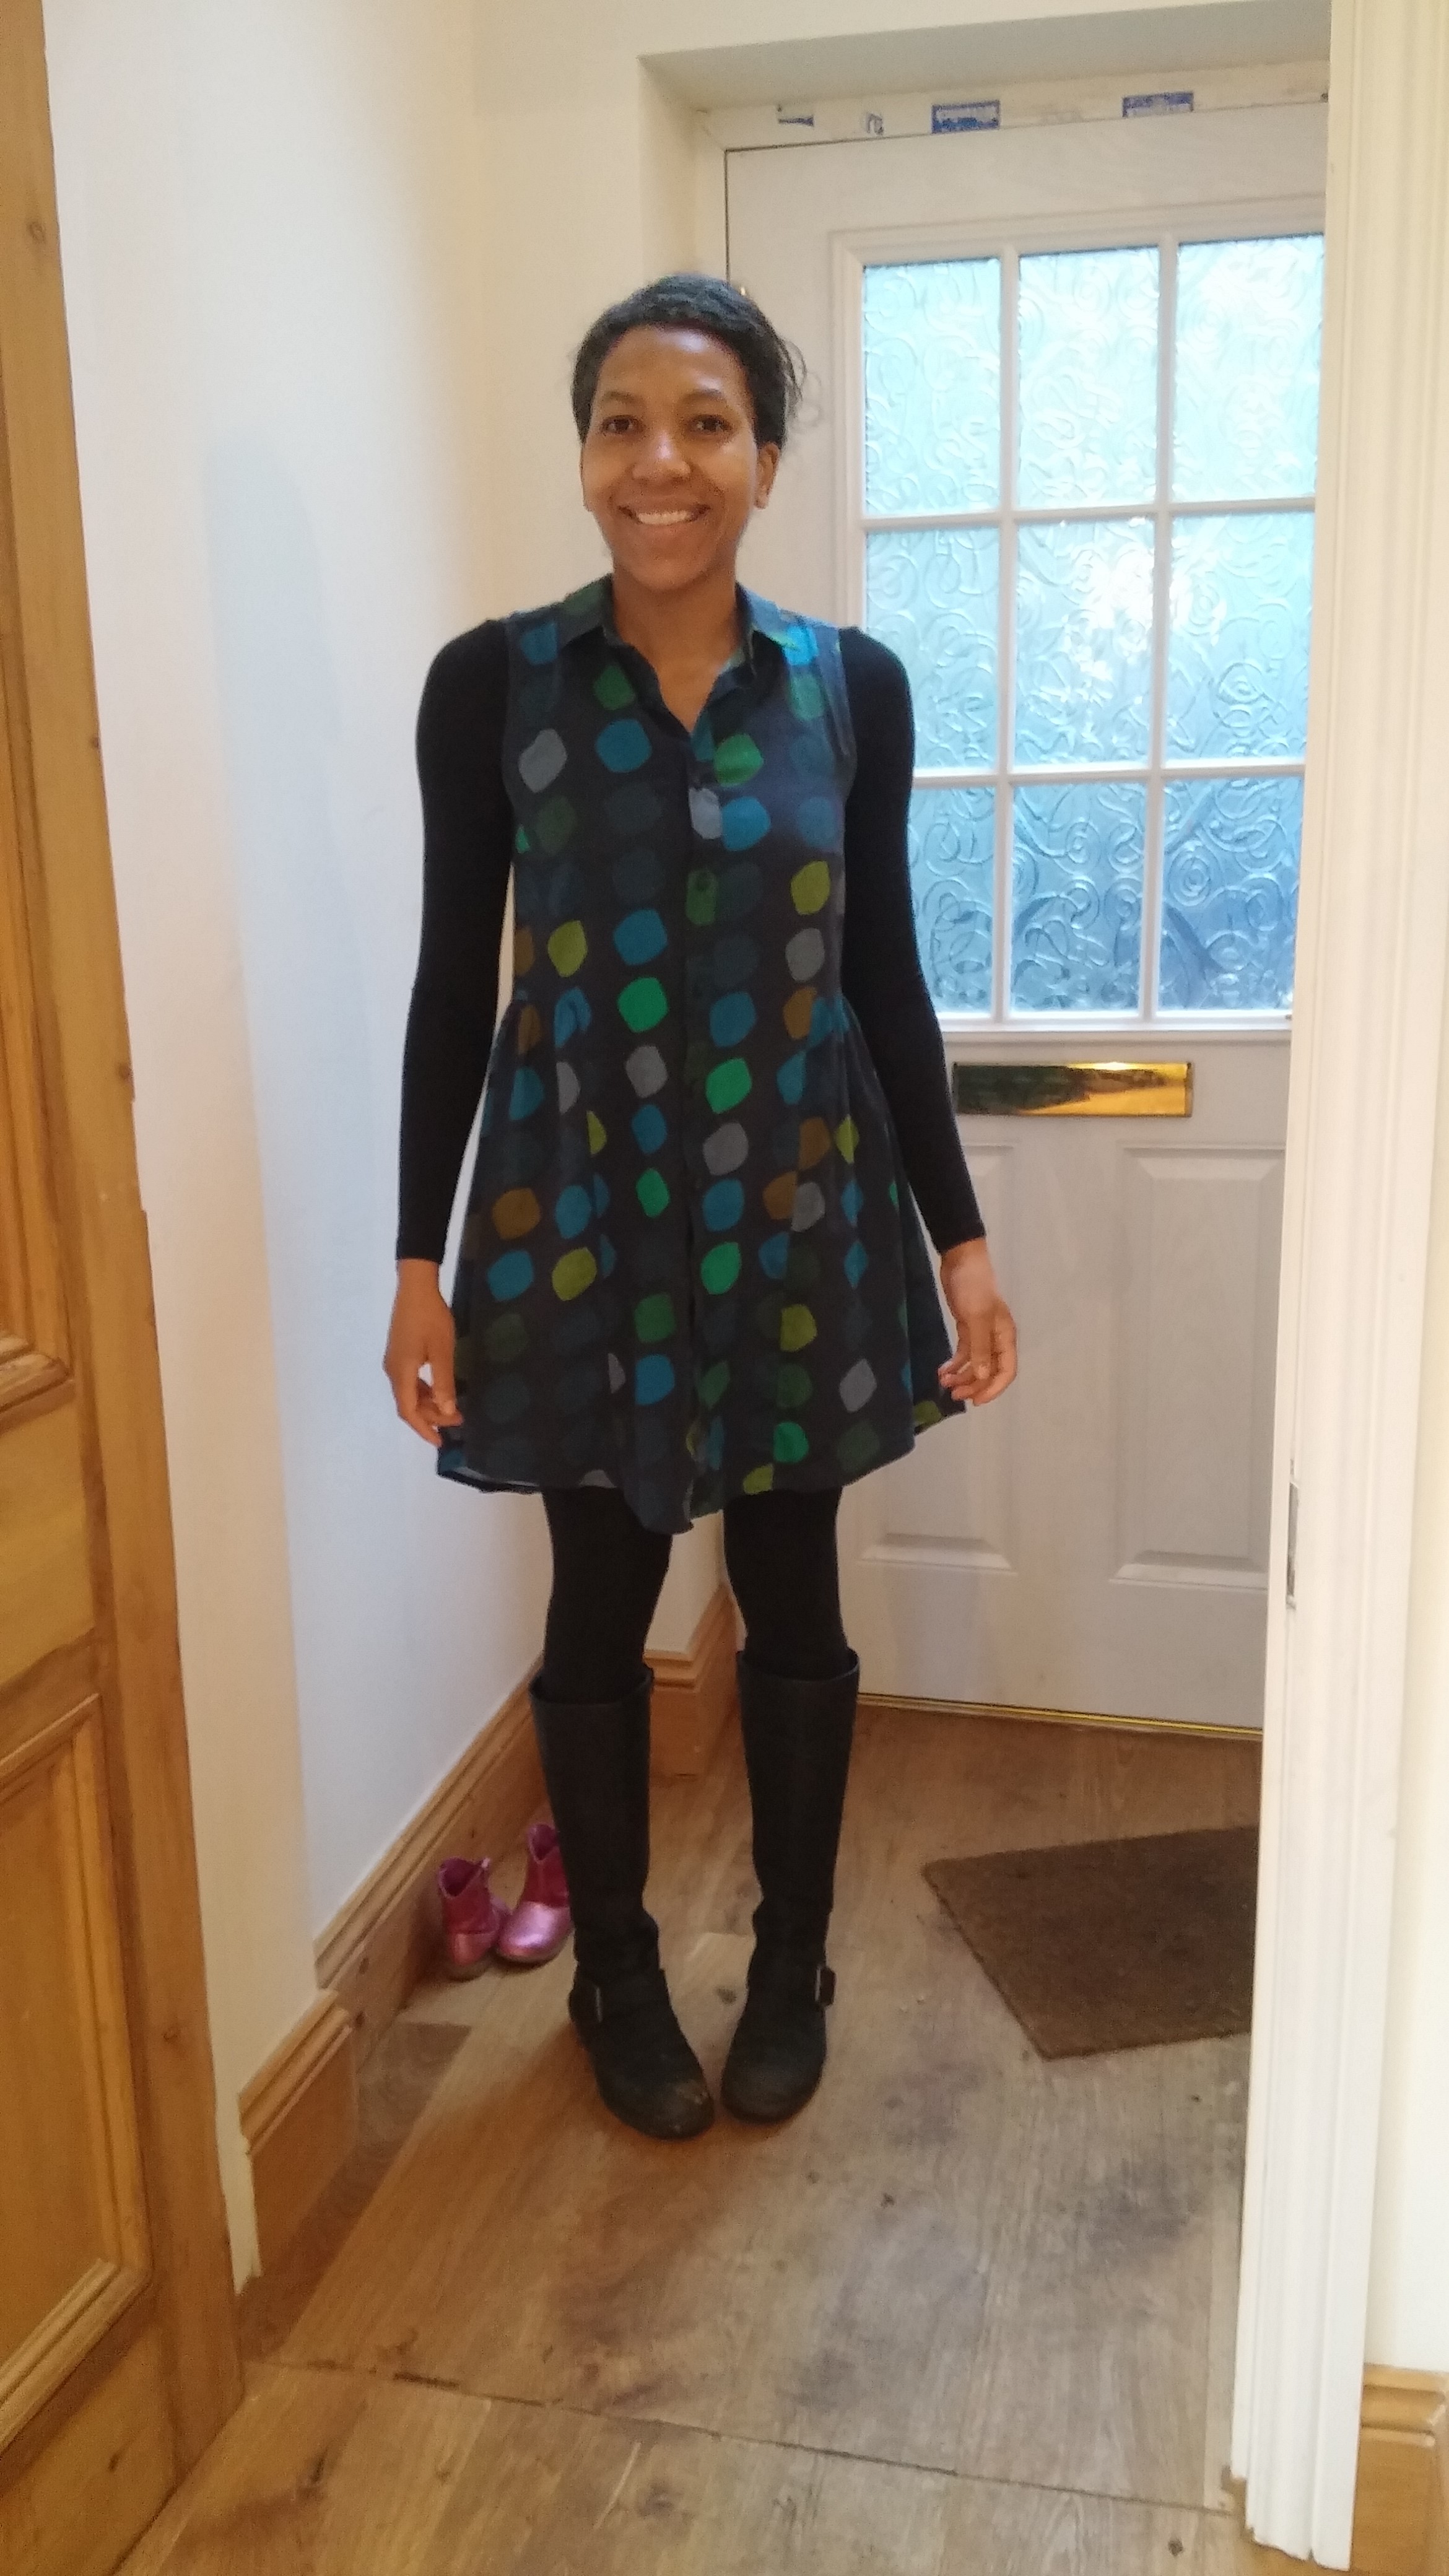 Grainline Studio Alder Shirtdress - styled as a winter outfit.